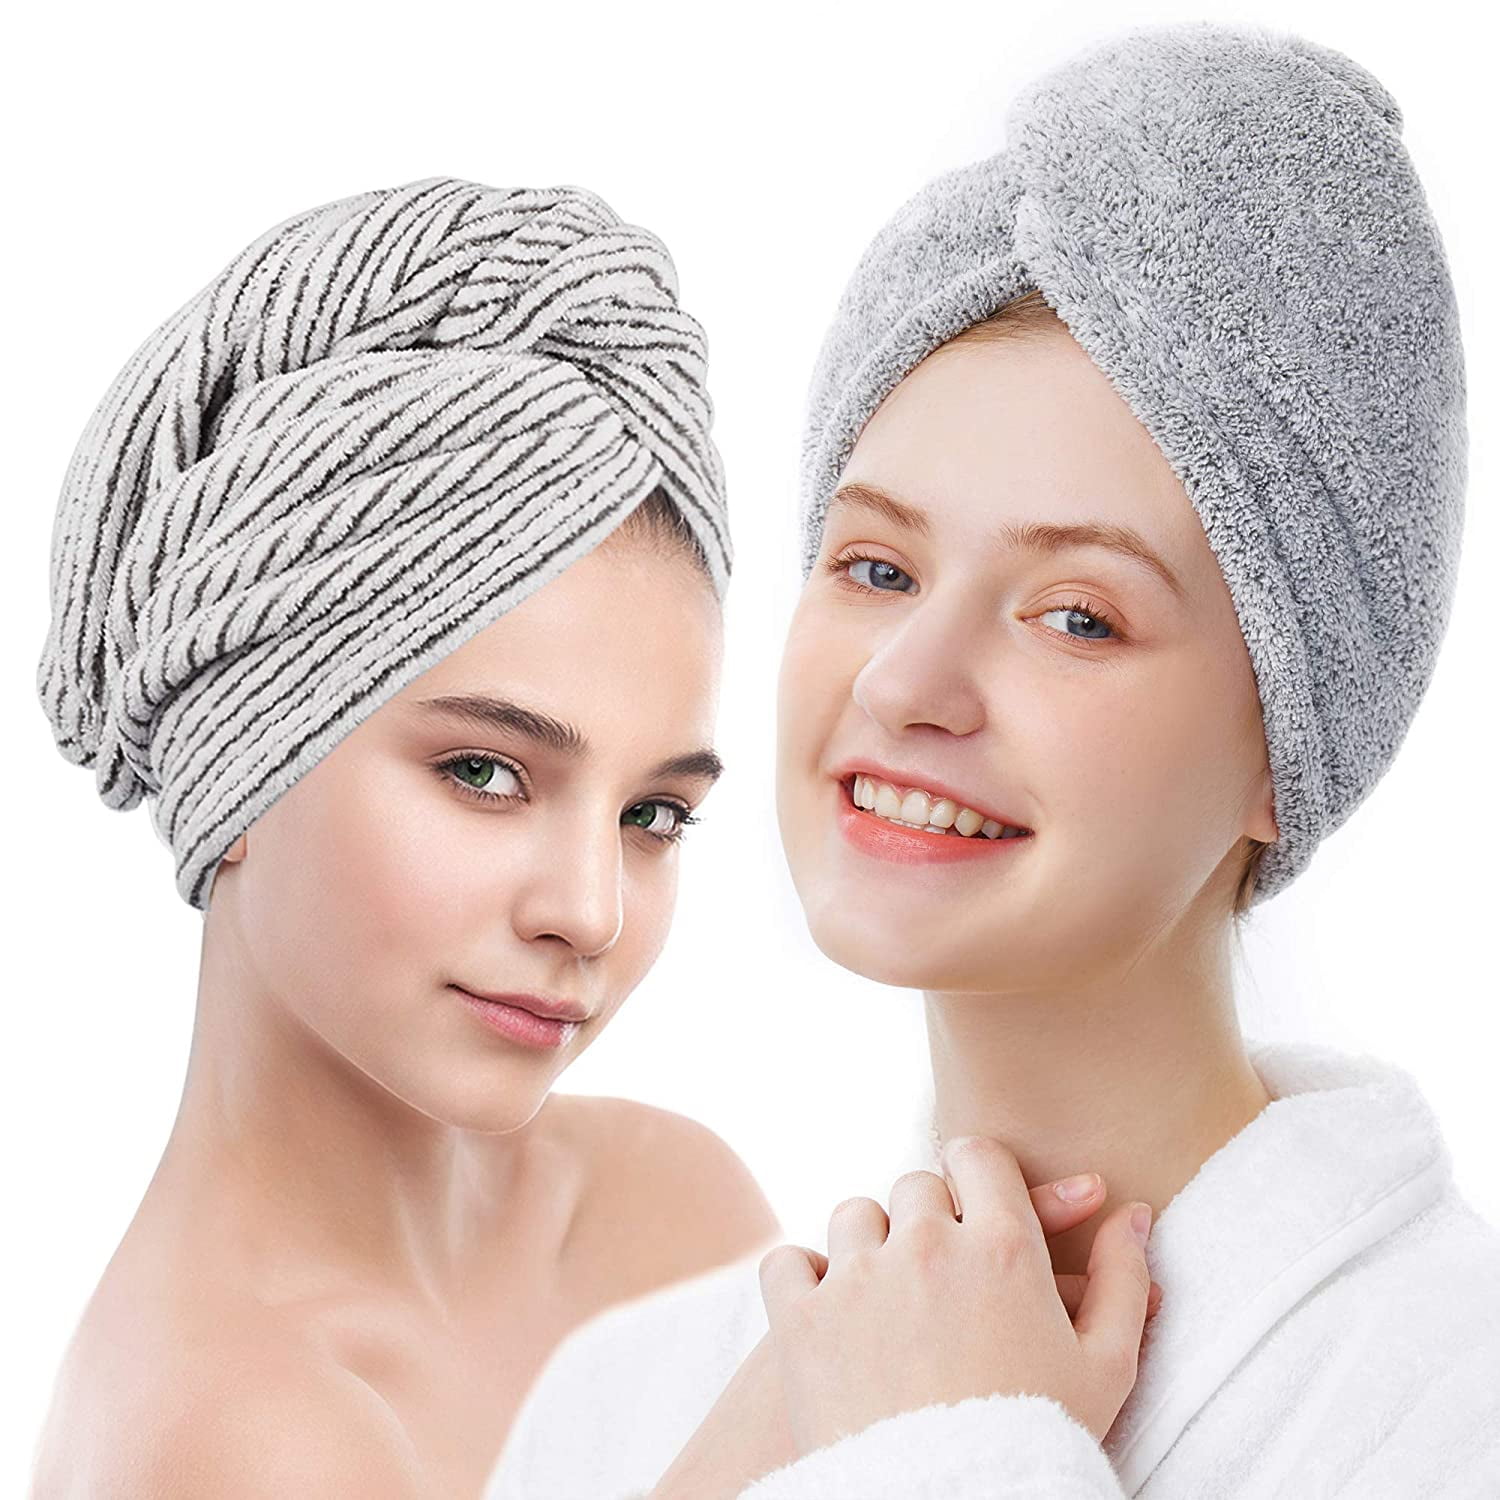 Coral velvet Thick Absorbent Shower Cap Fast 3 Minutes RAPID DRYING HAIR TOWEL 